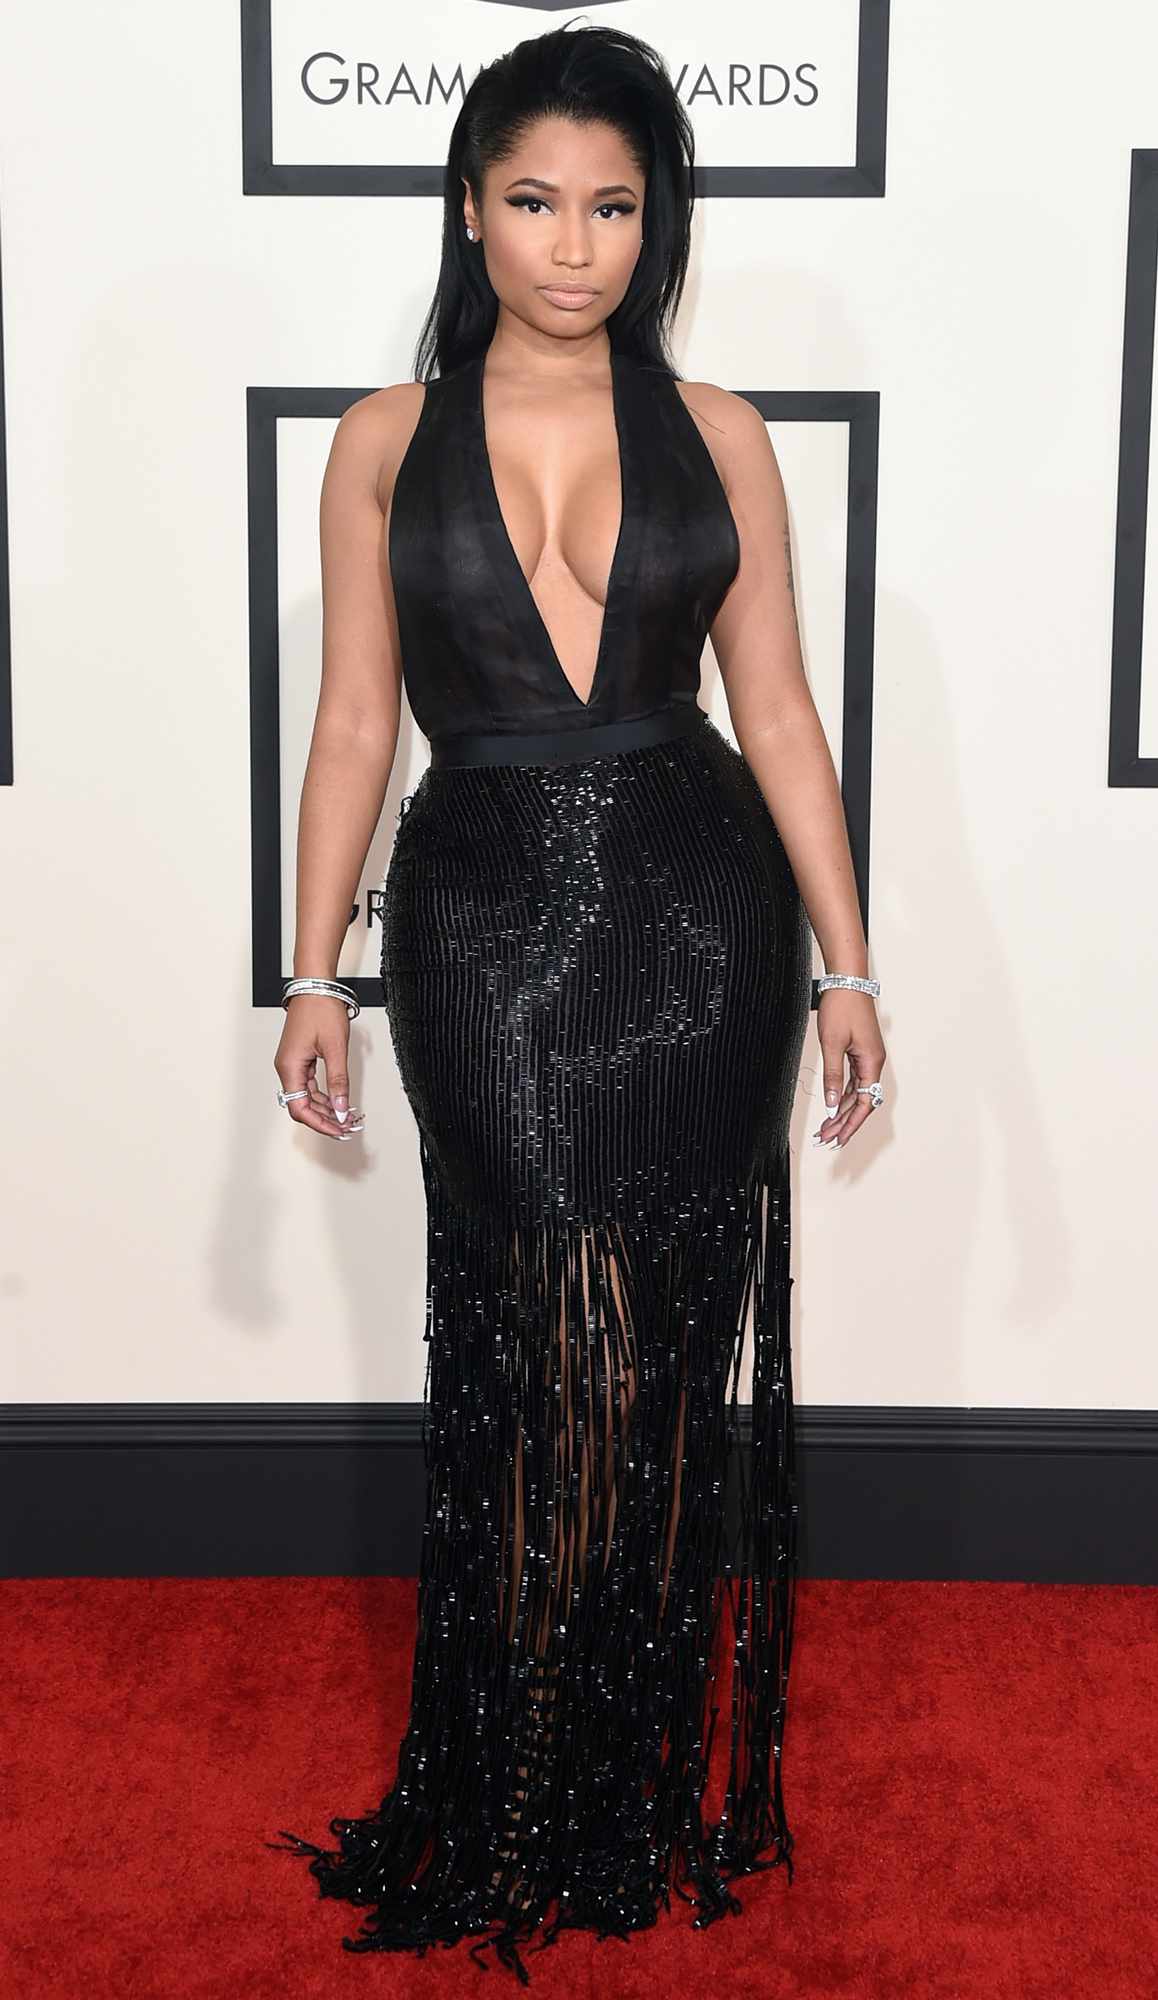 Nicki Minaj attends The 57th Annual GRAMMY Awards at the STAPLES Center on February 8, 2015 in Los Angeles, California